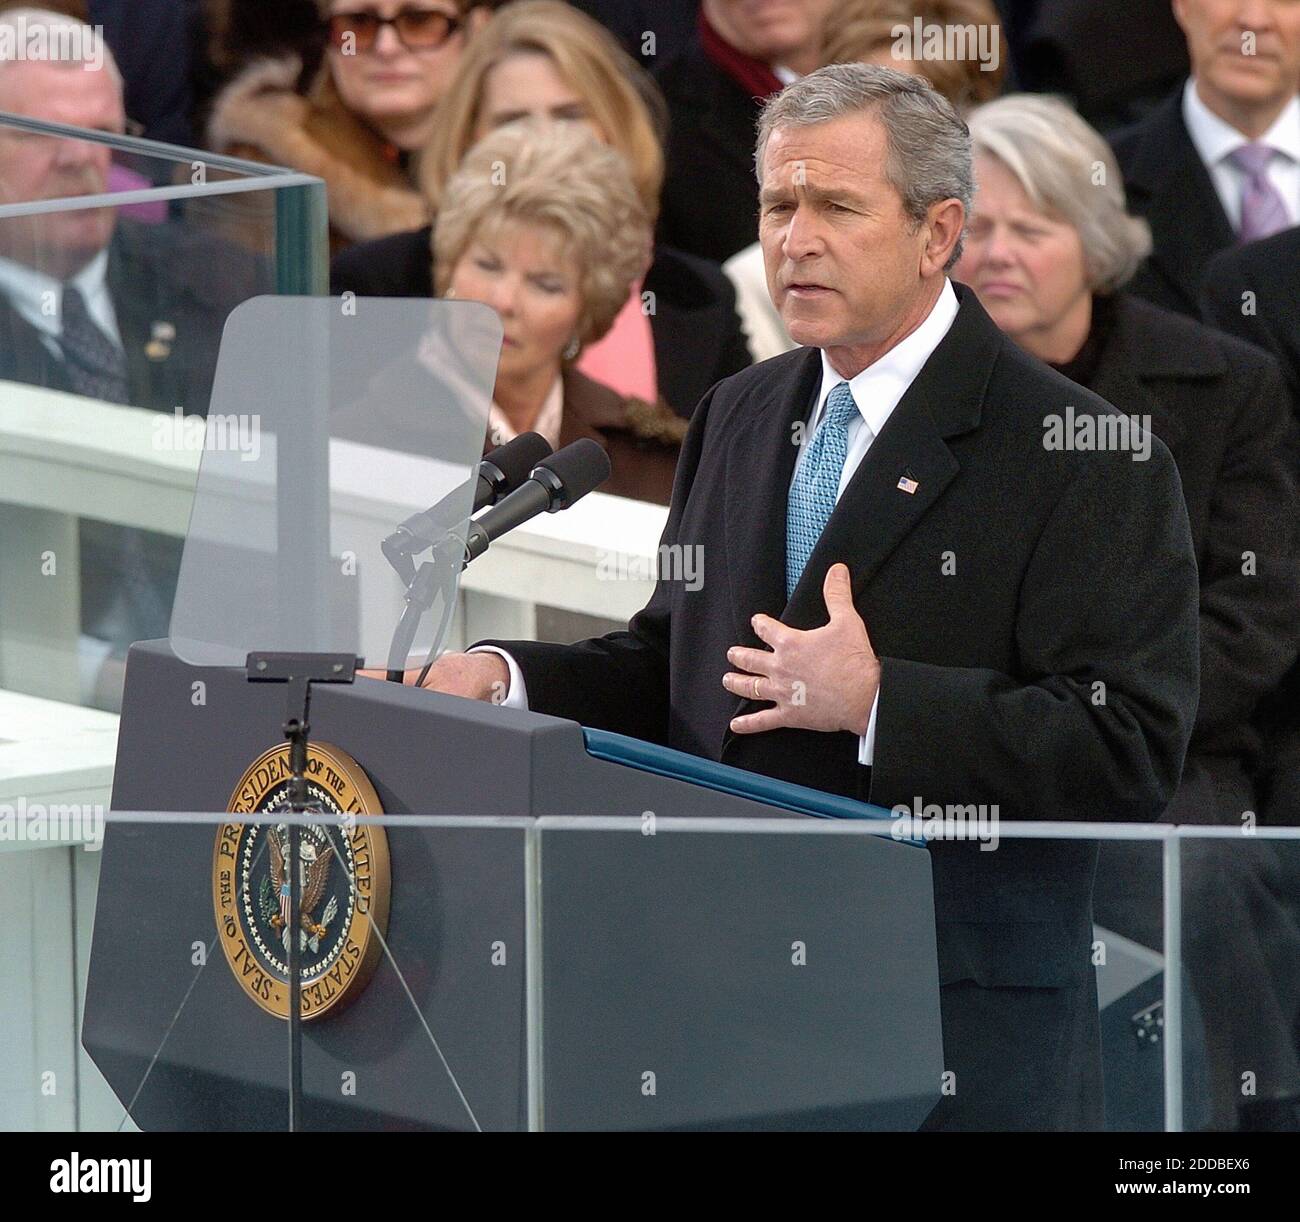 NO FILM, NO VIDEO, NO TV, NO DOCUMENTARY - U.S. President George W. Bush gives his Inauguration Day speech, during the presidential Inauguration ceremony on the steps of the U.S. Capitol, in Washington, DC, USA, on January 20, 2005. Photo by George Bridges/US News Story Slugged/KRT/ABACA. Stock Photo